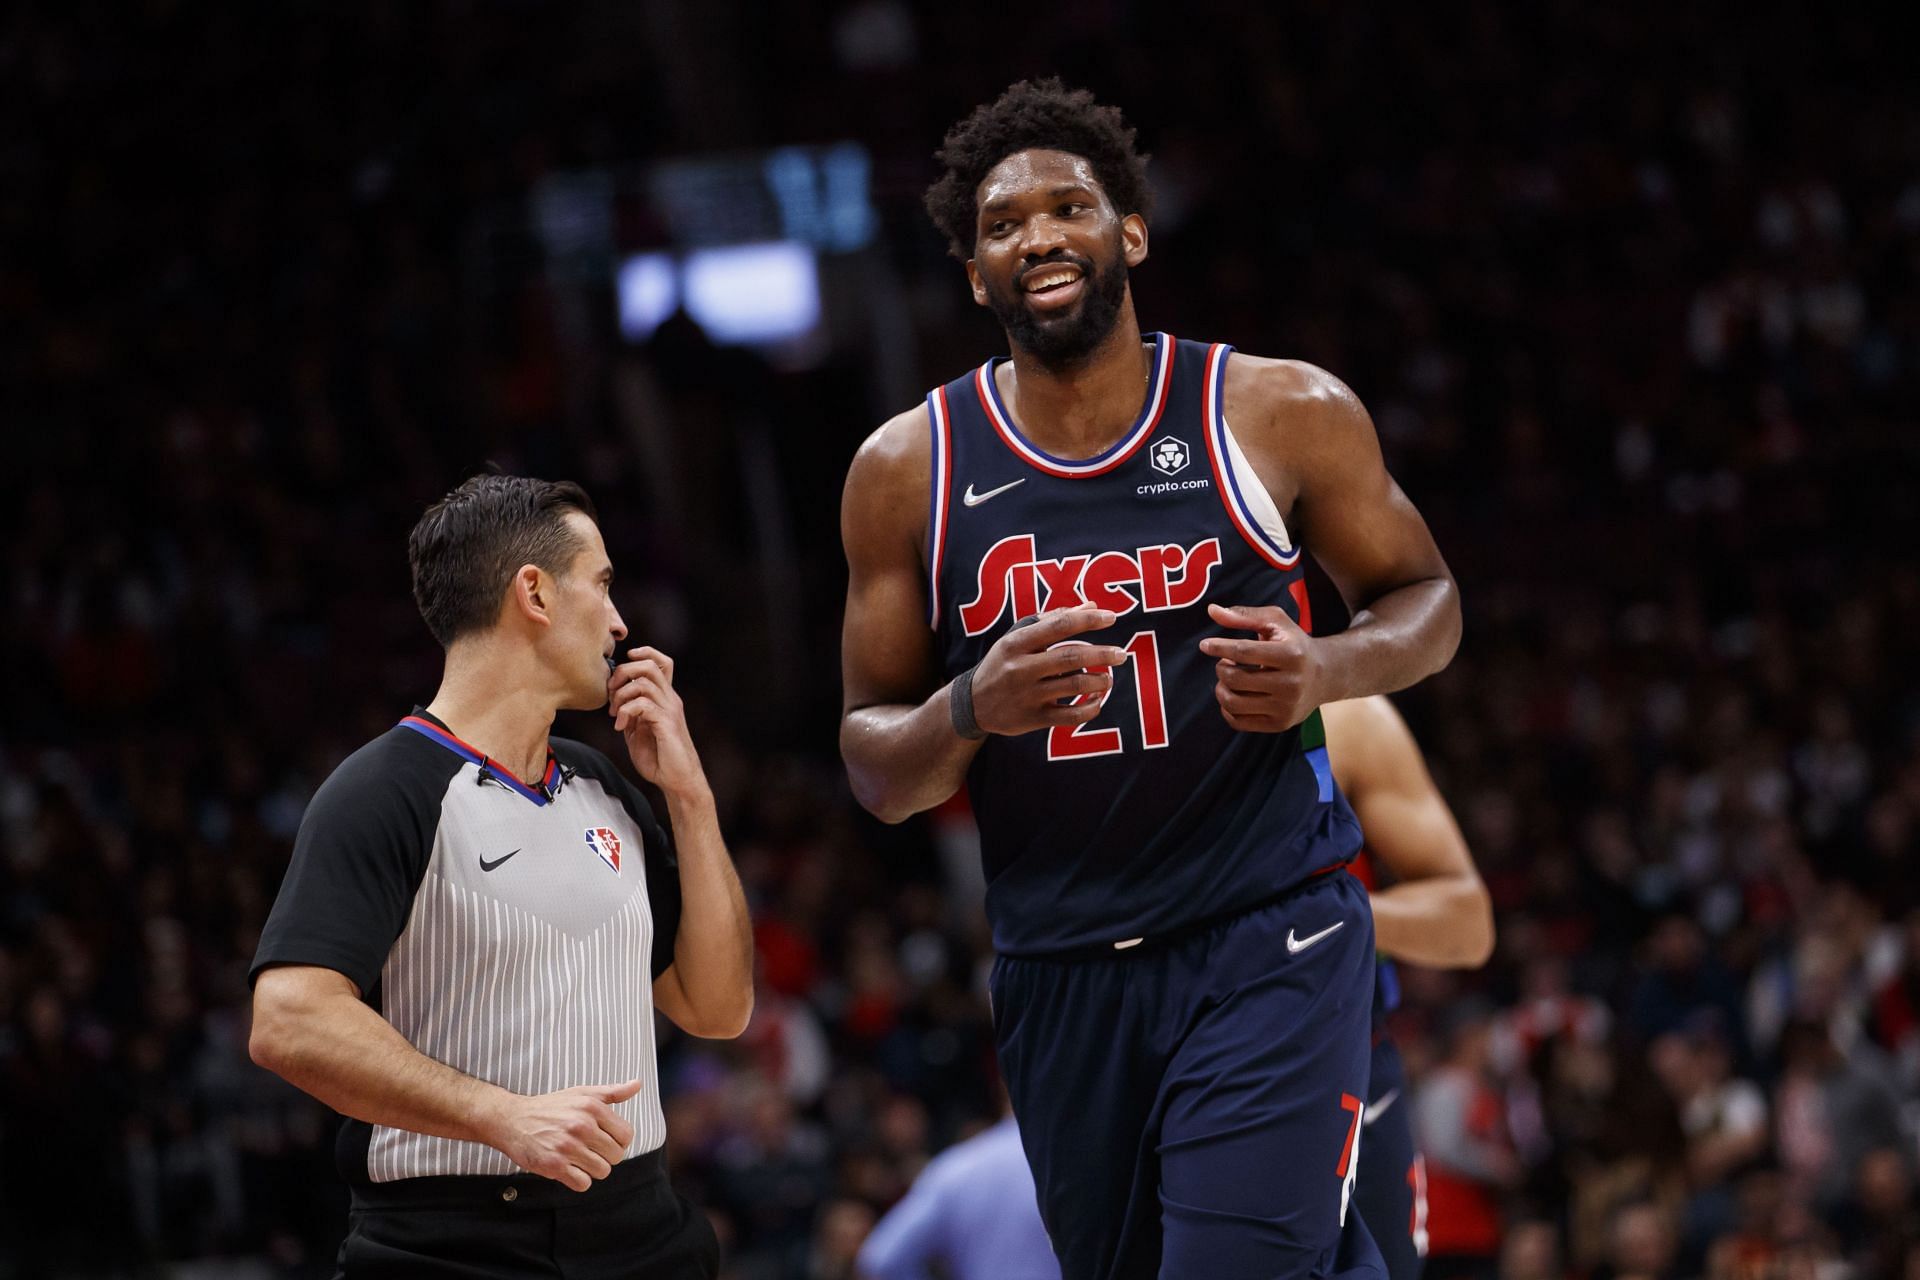 Philadelphia 76ers star Joel Embiid will miss the first two games of the Eastern Conference semifinals